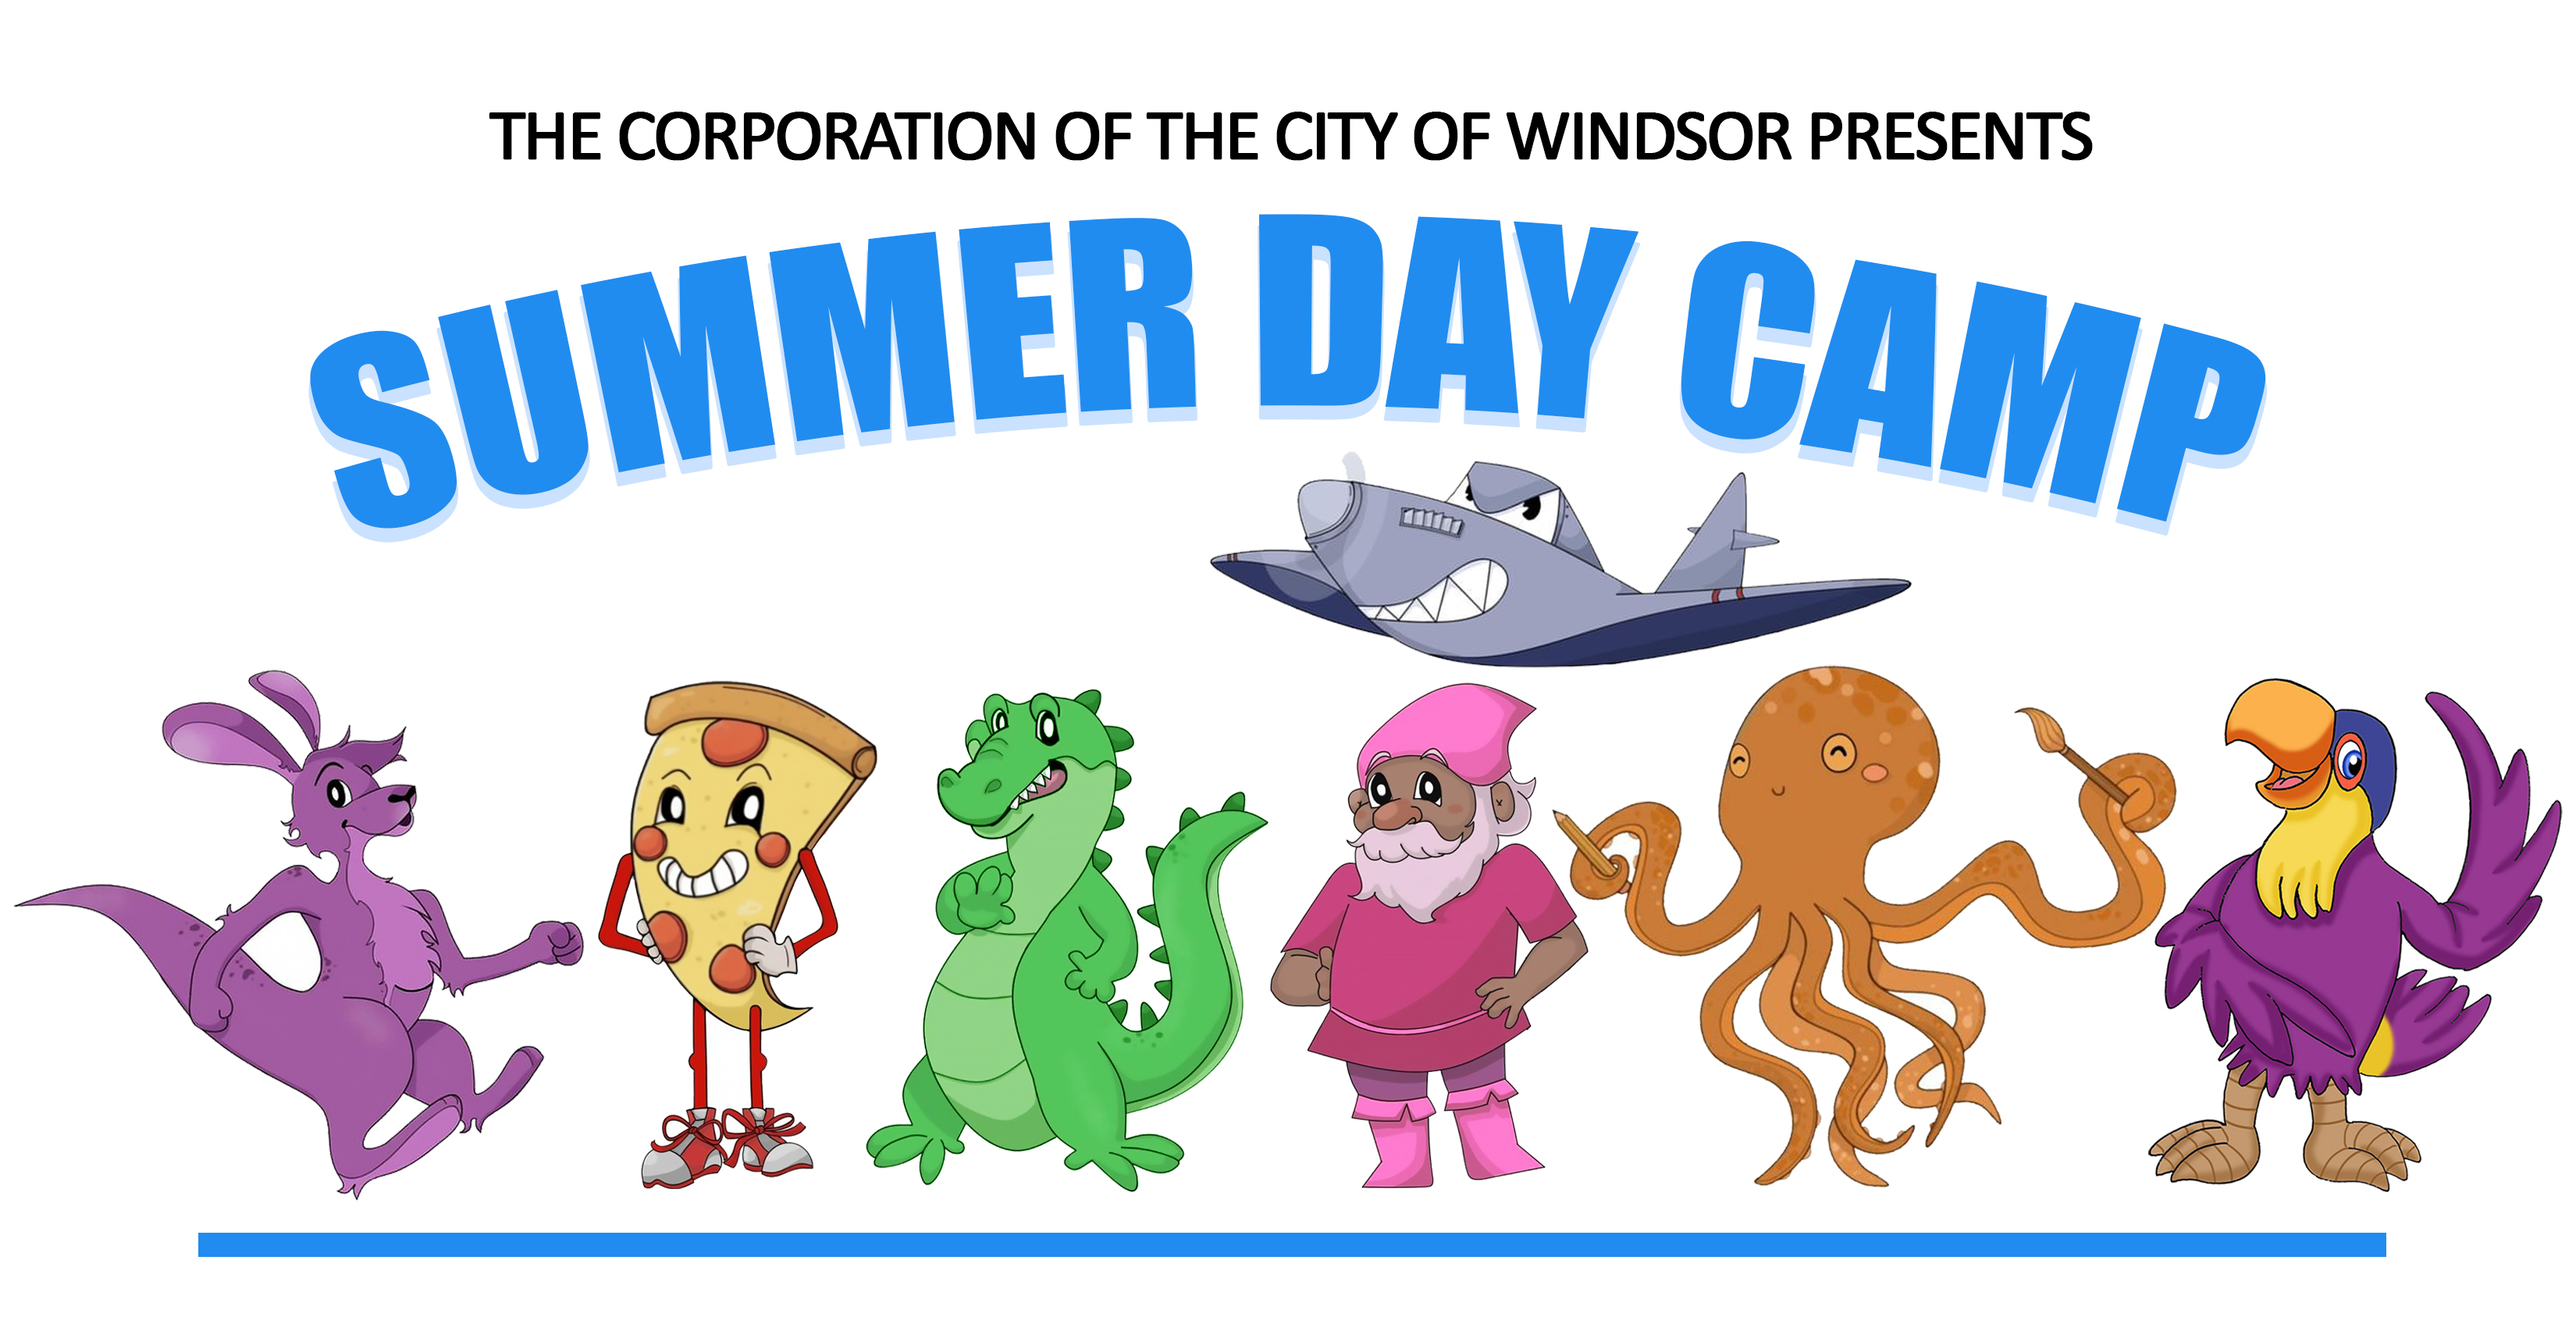 Text reads the Corporation of the City of Windsor presents Summer Day Camp. Cartoon image of day camp mascots including, from the left, a purple kangaroo, pepperoni pizza, green alligator, pink gnome, orange octopus, yellow and purple toucan, and a blue jet.